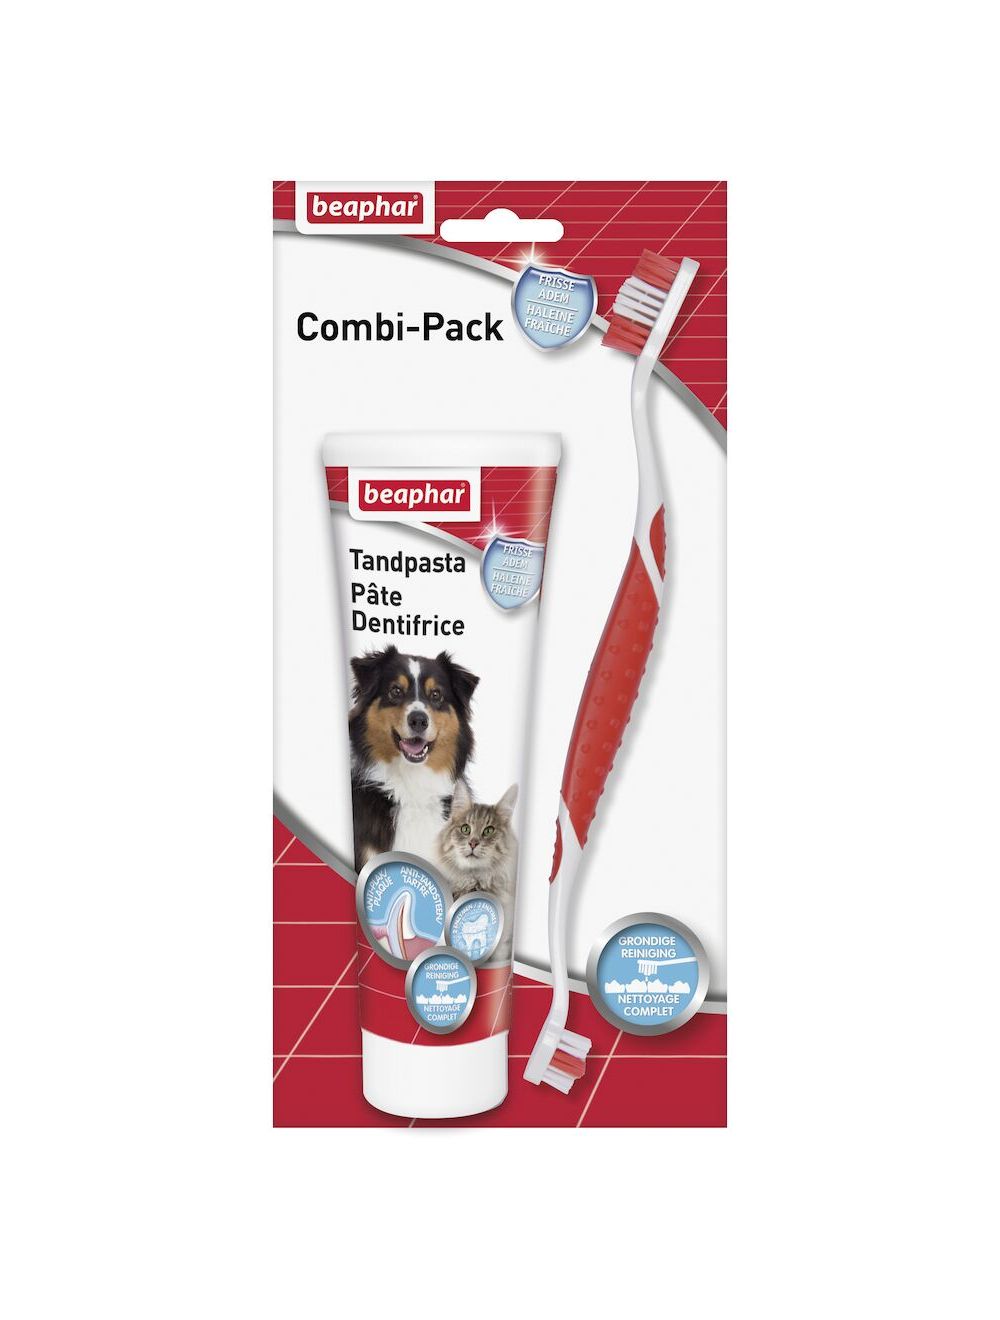 Toothpaste Toothbrush Combi-Pack